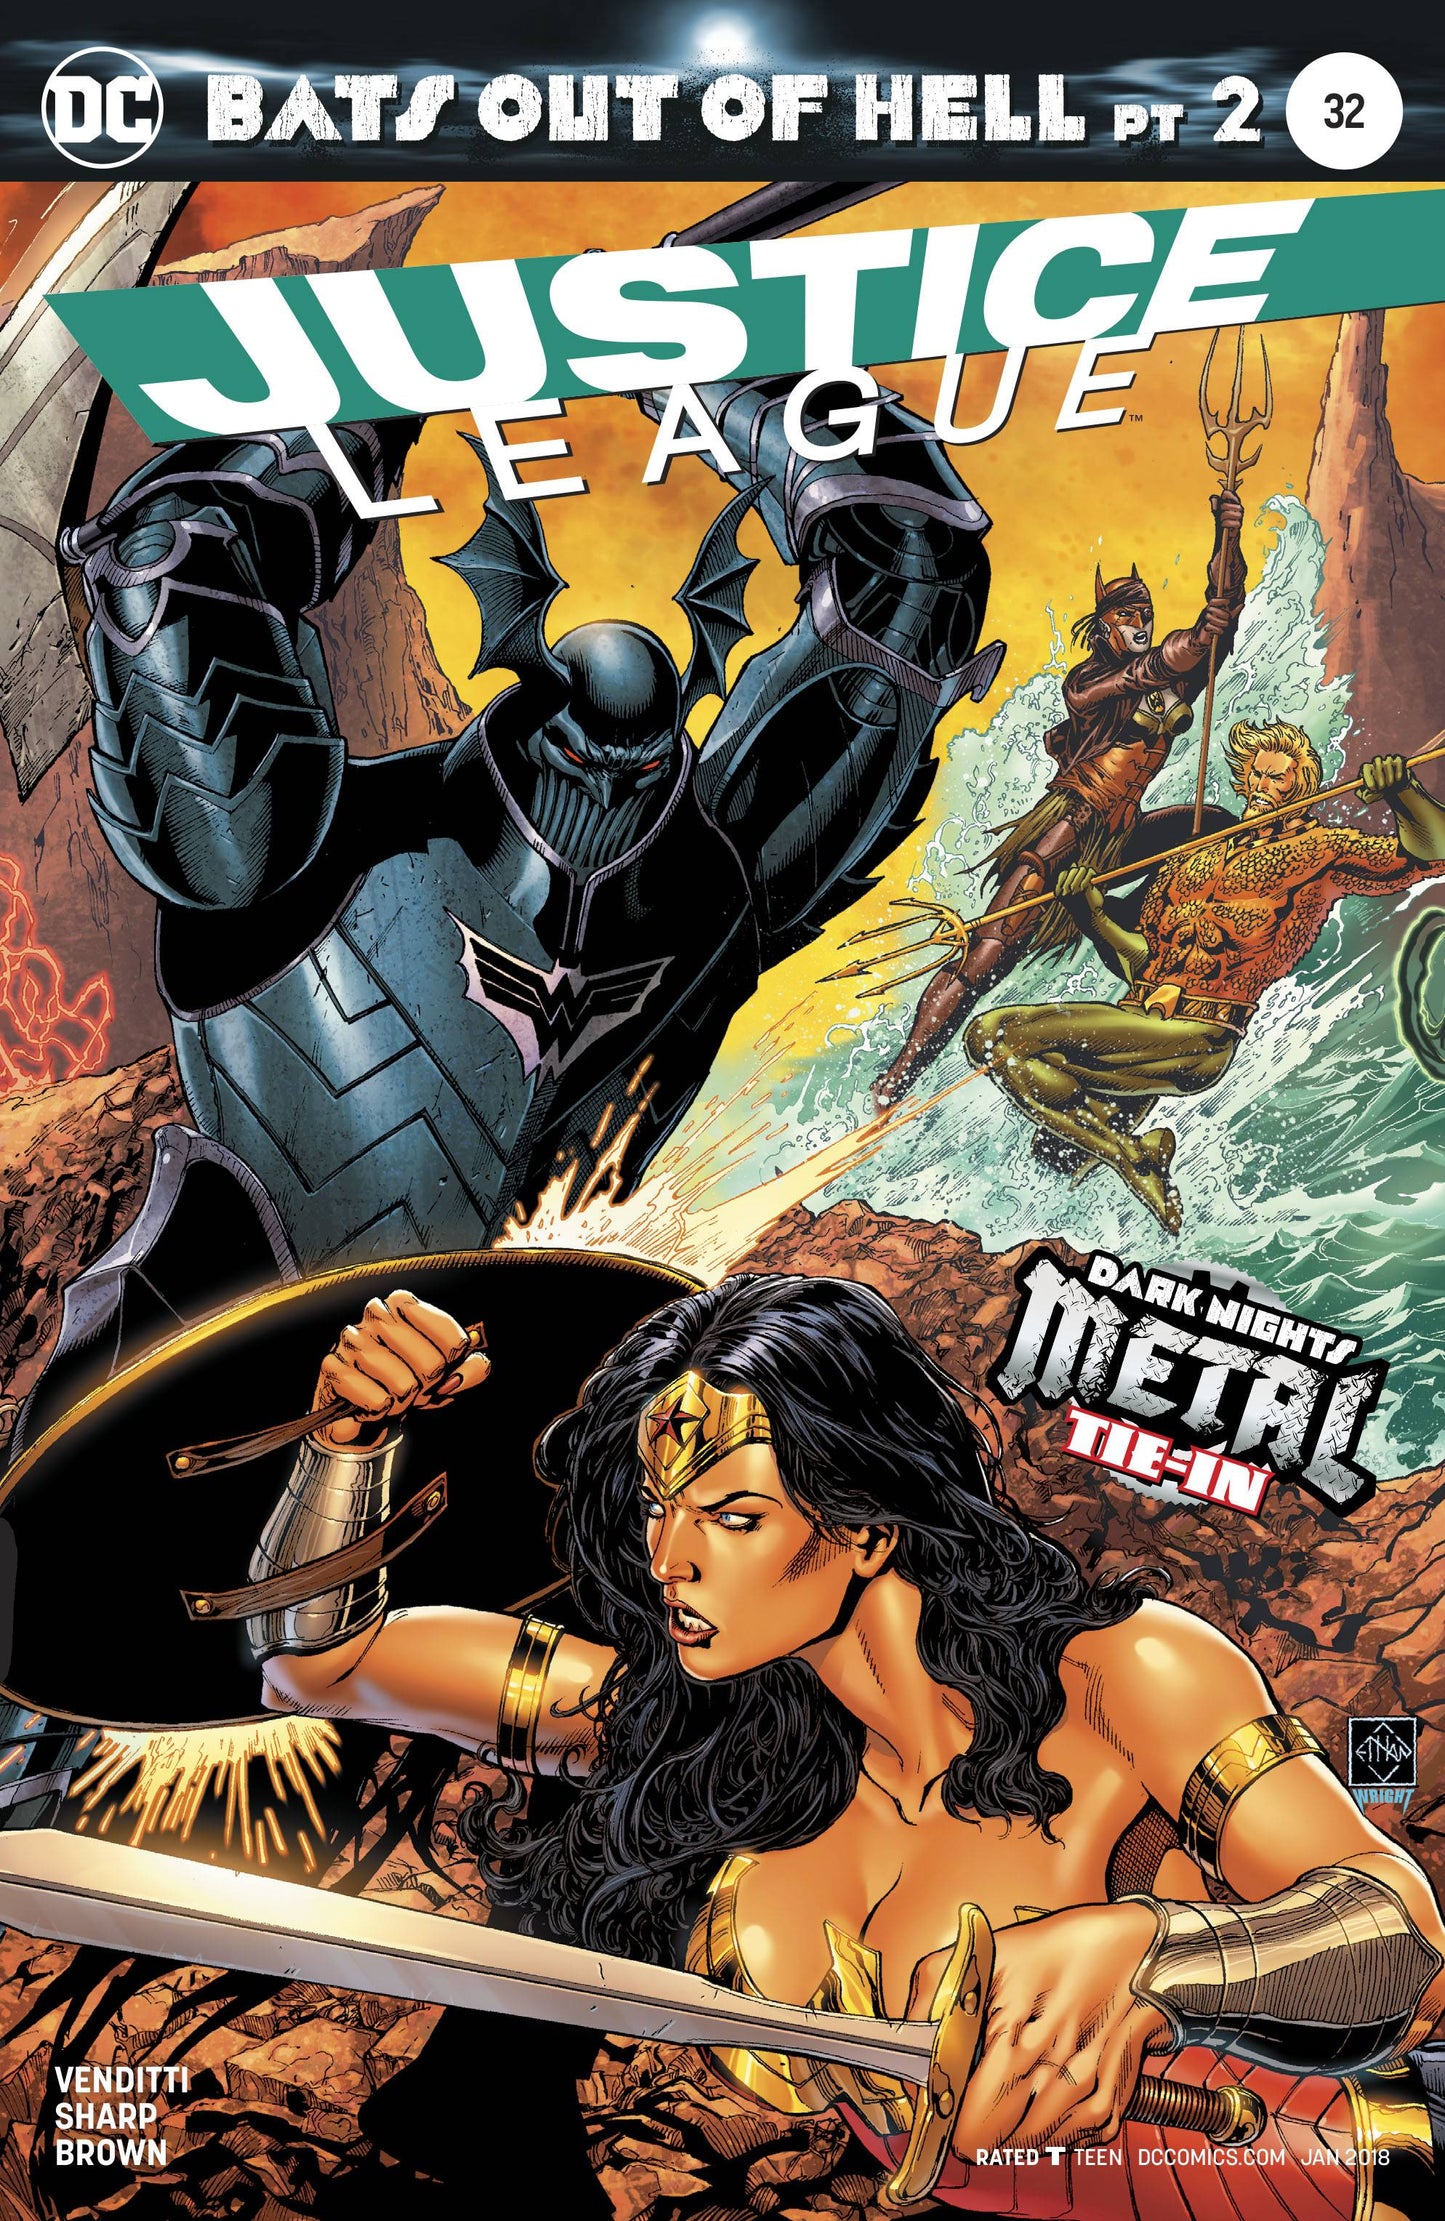 Justice League #32 Bats Out of Hell Pt 2 [2017]